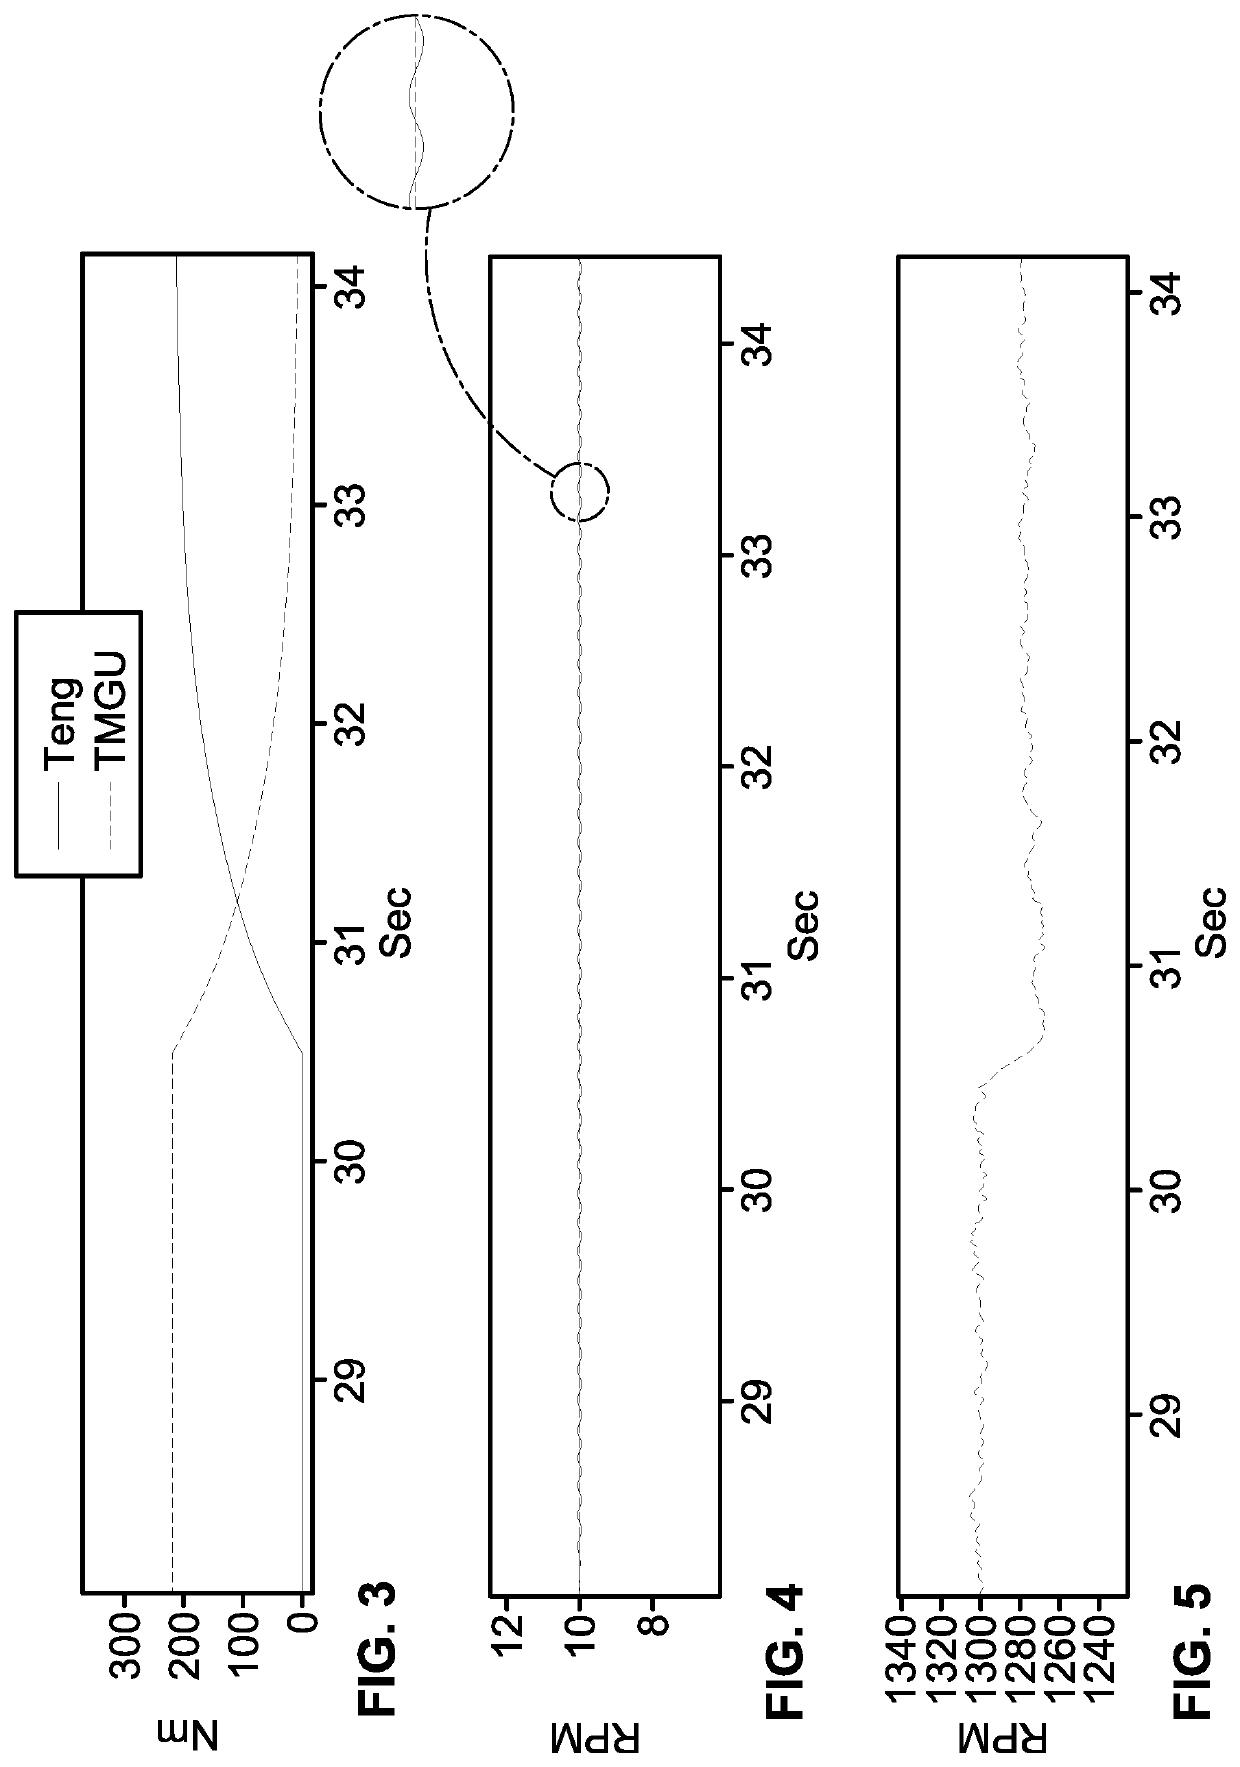 Coordinated torque and speed control systems and logic for hybrid electric vehicles